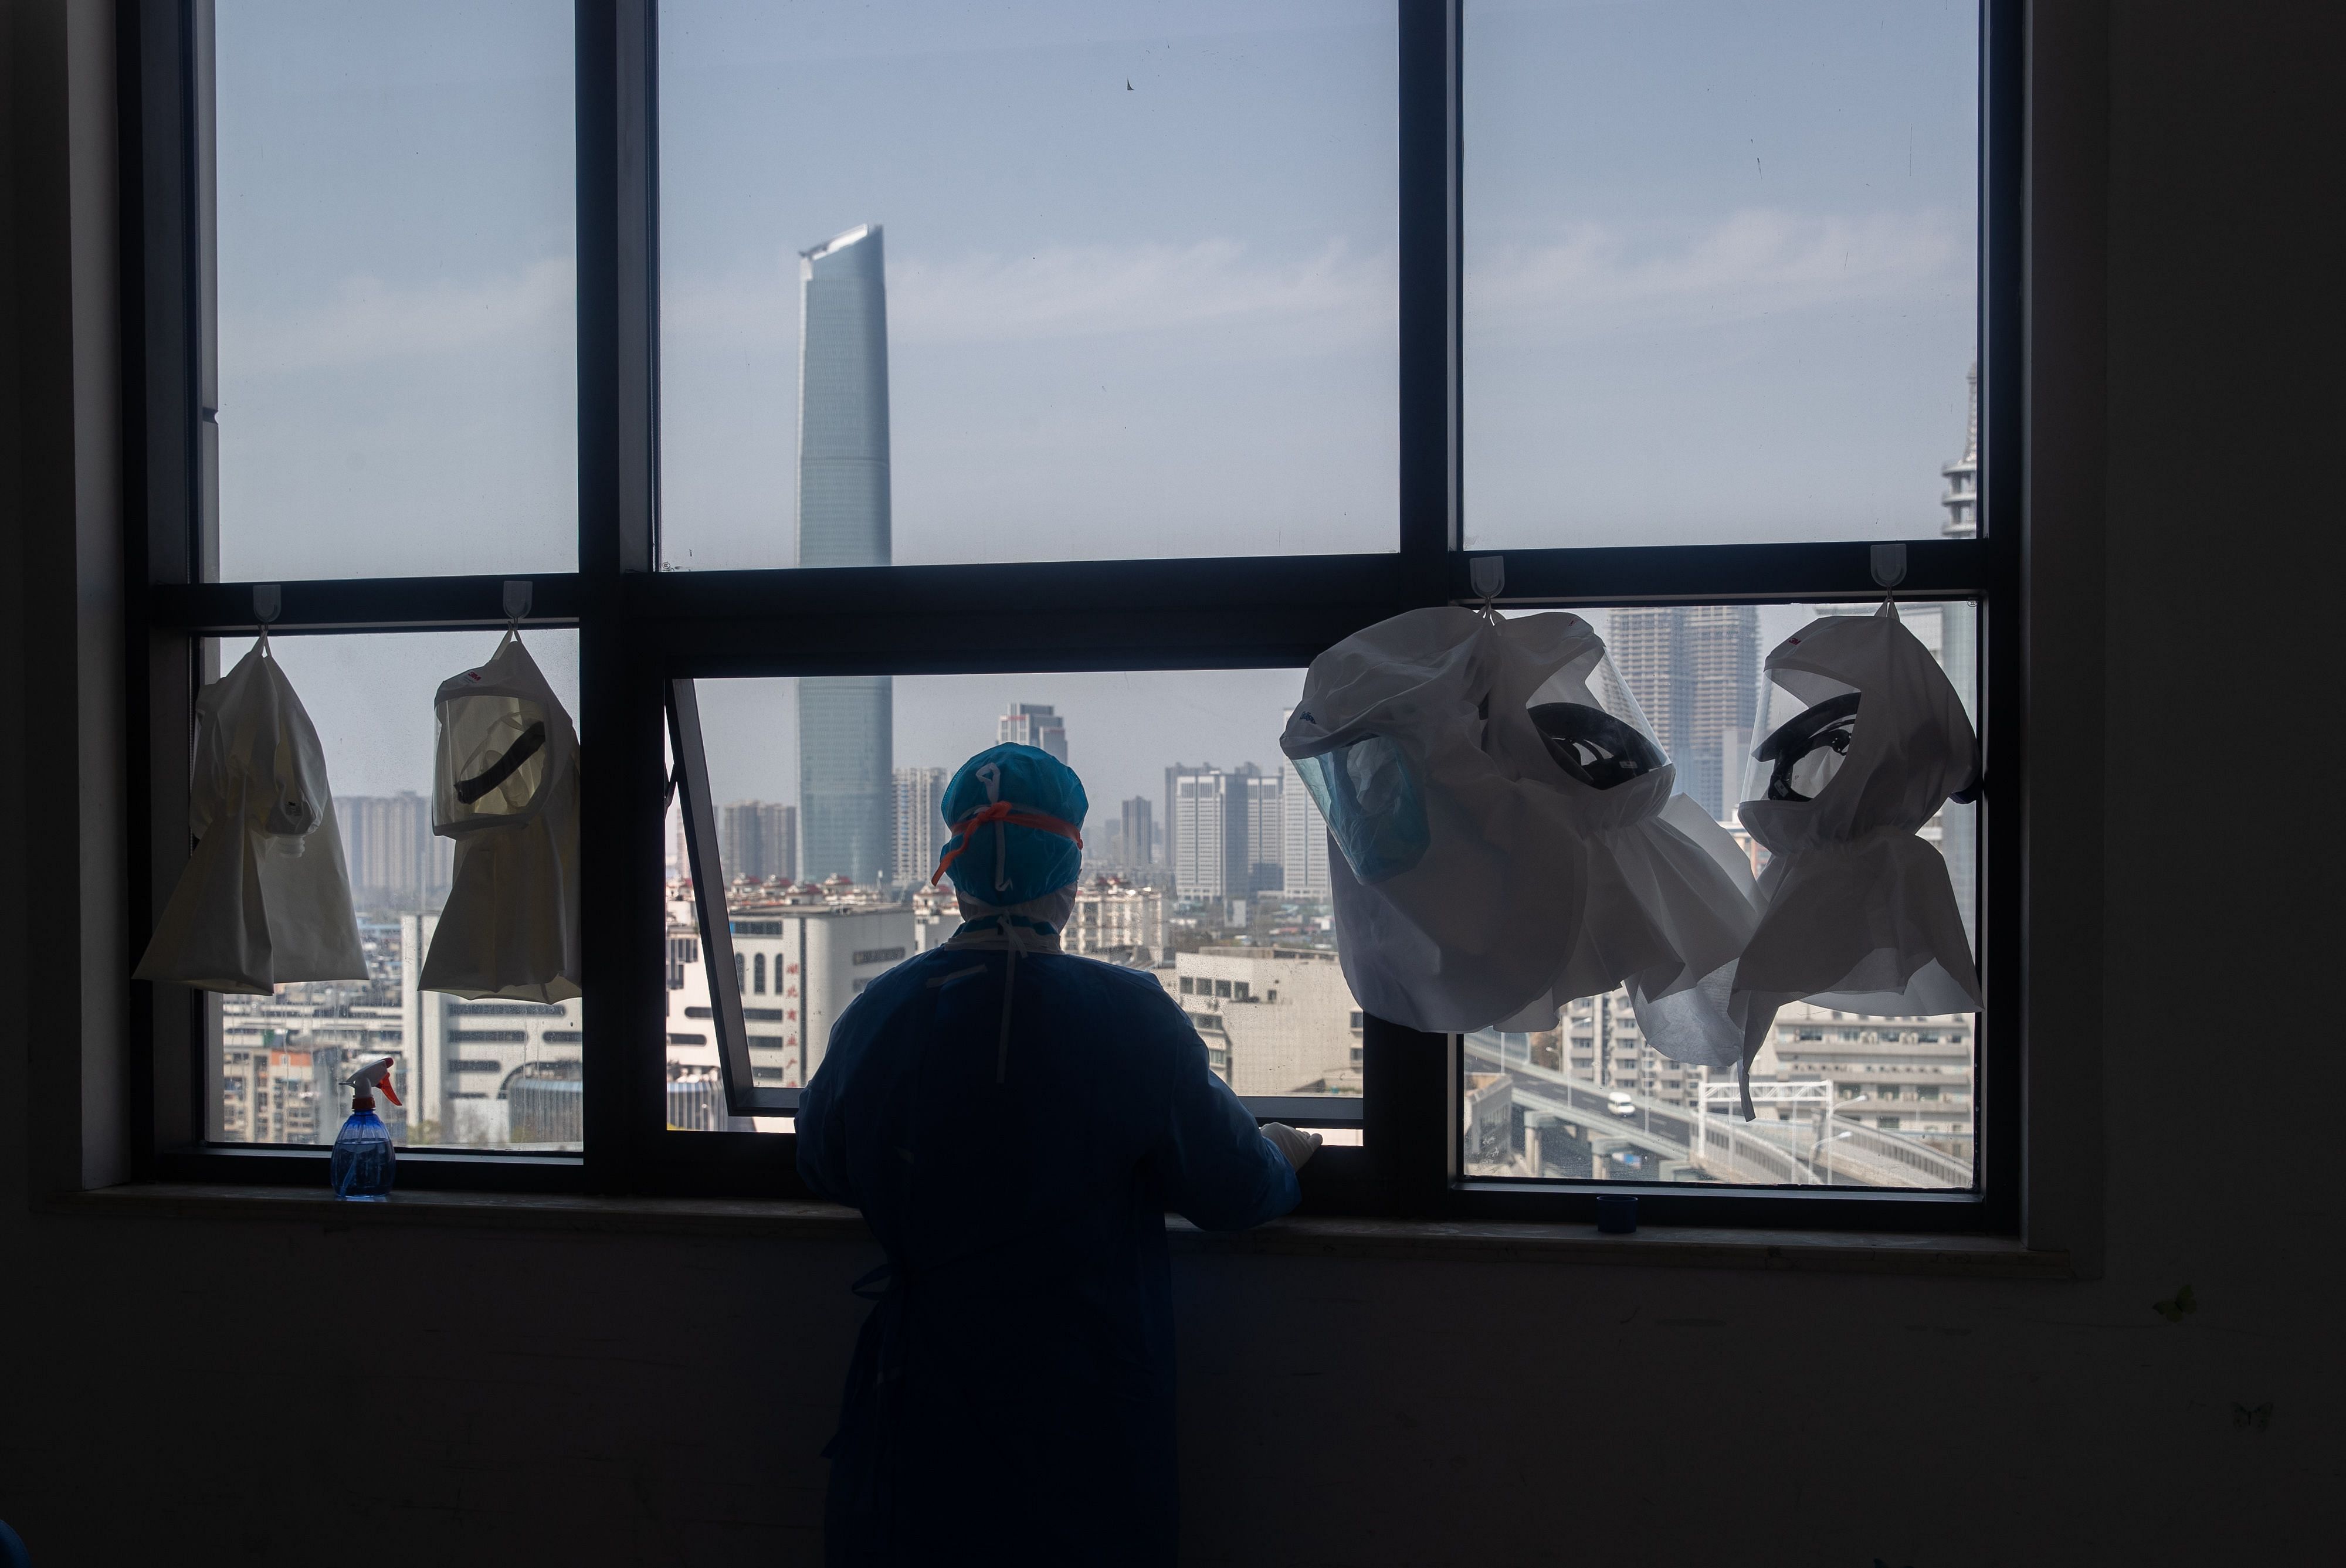 A medical worker looks out from the window of a changing room after treating COVID-19 coronavirus patients at a hospital in Wuhan. (Credit: AFP)